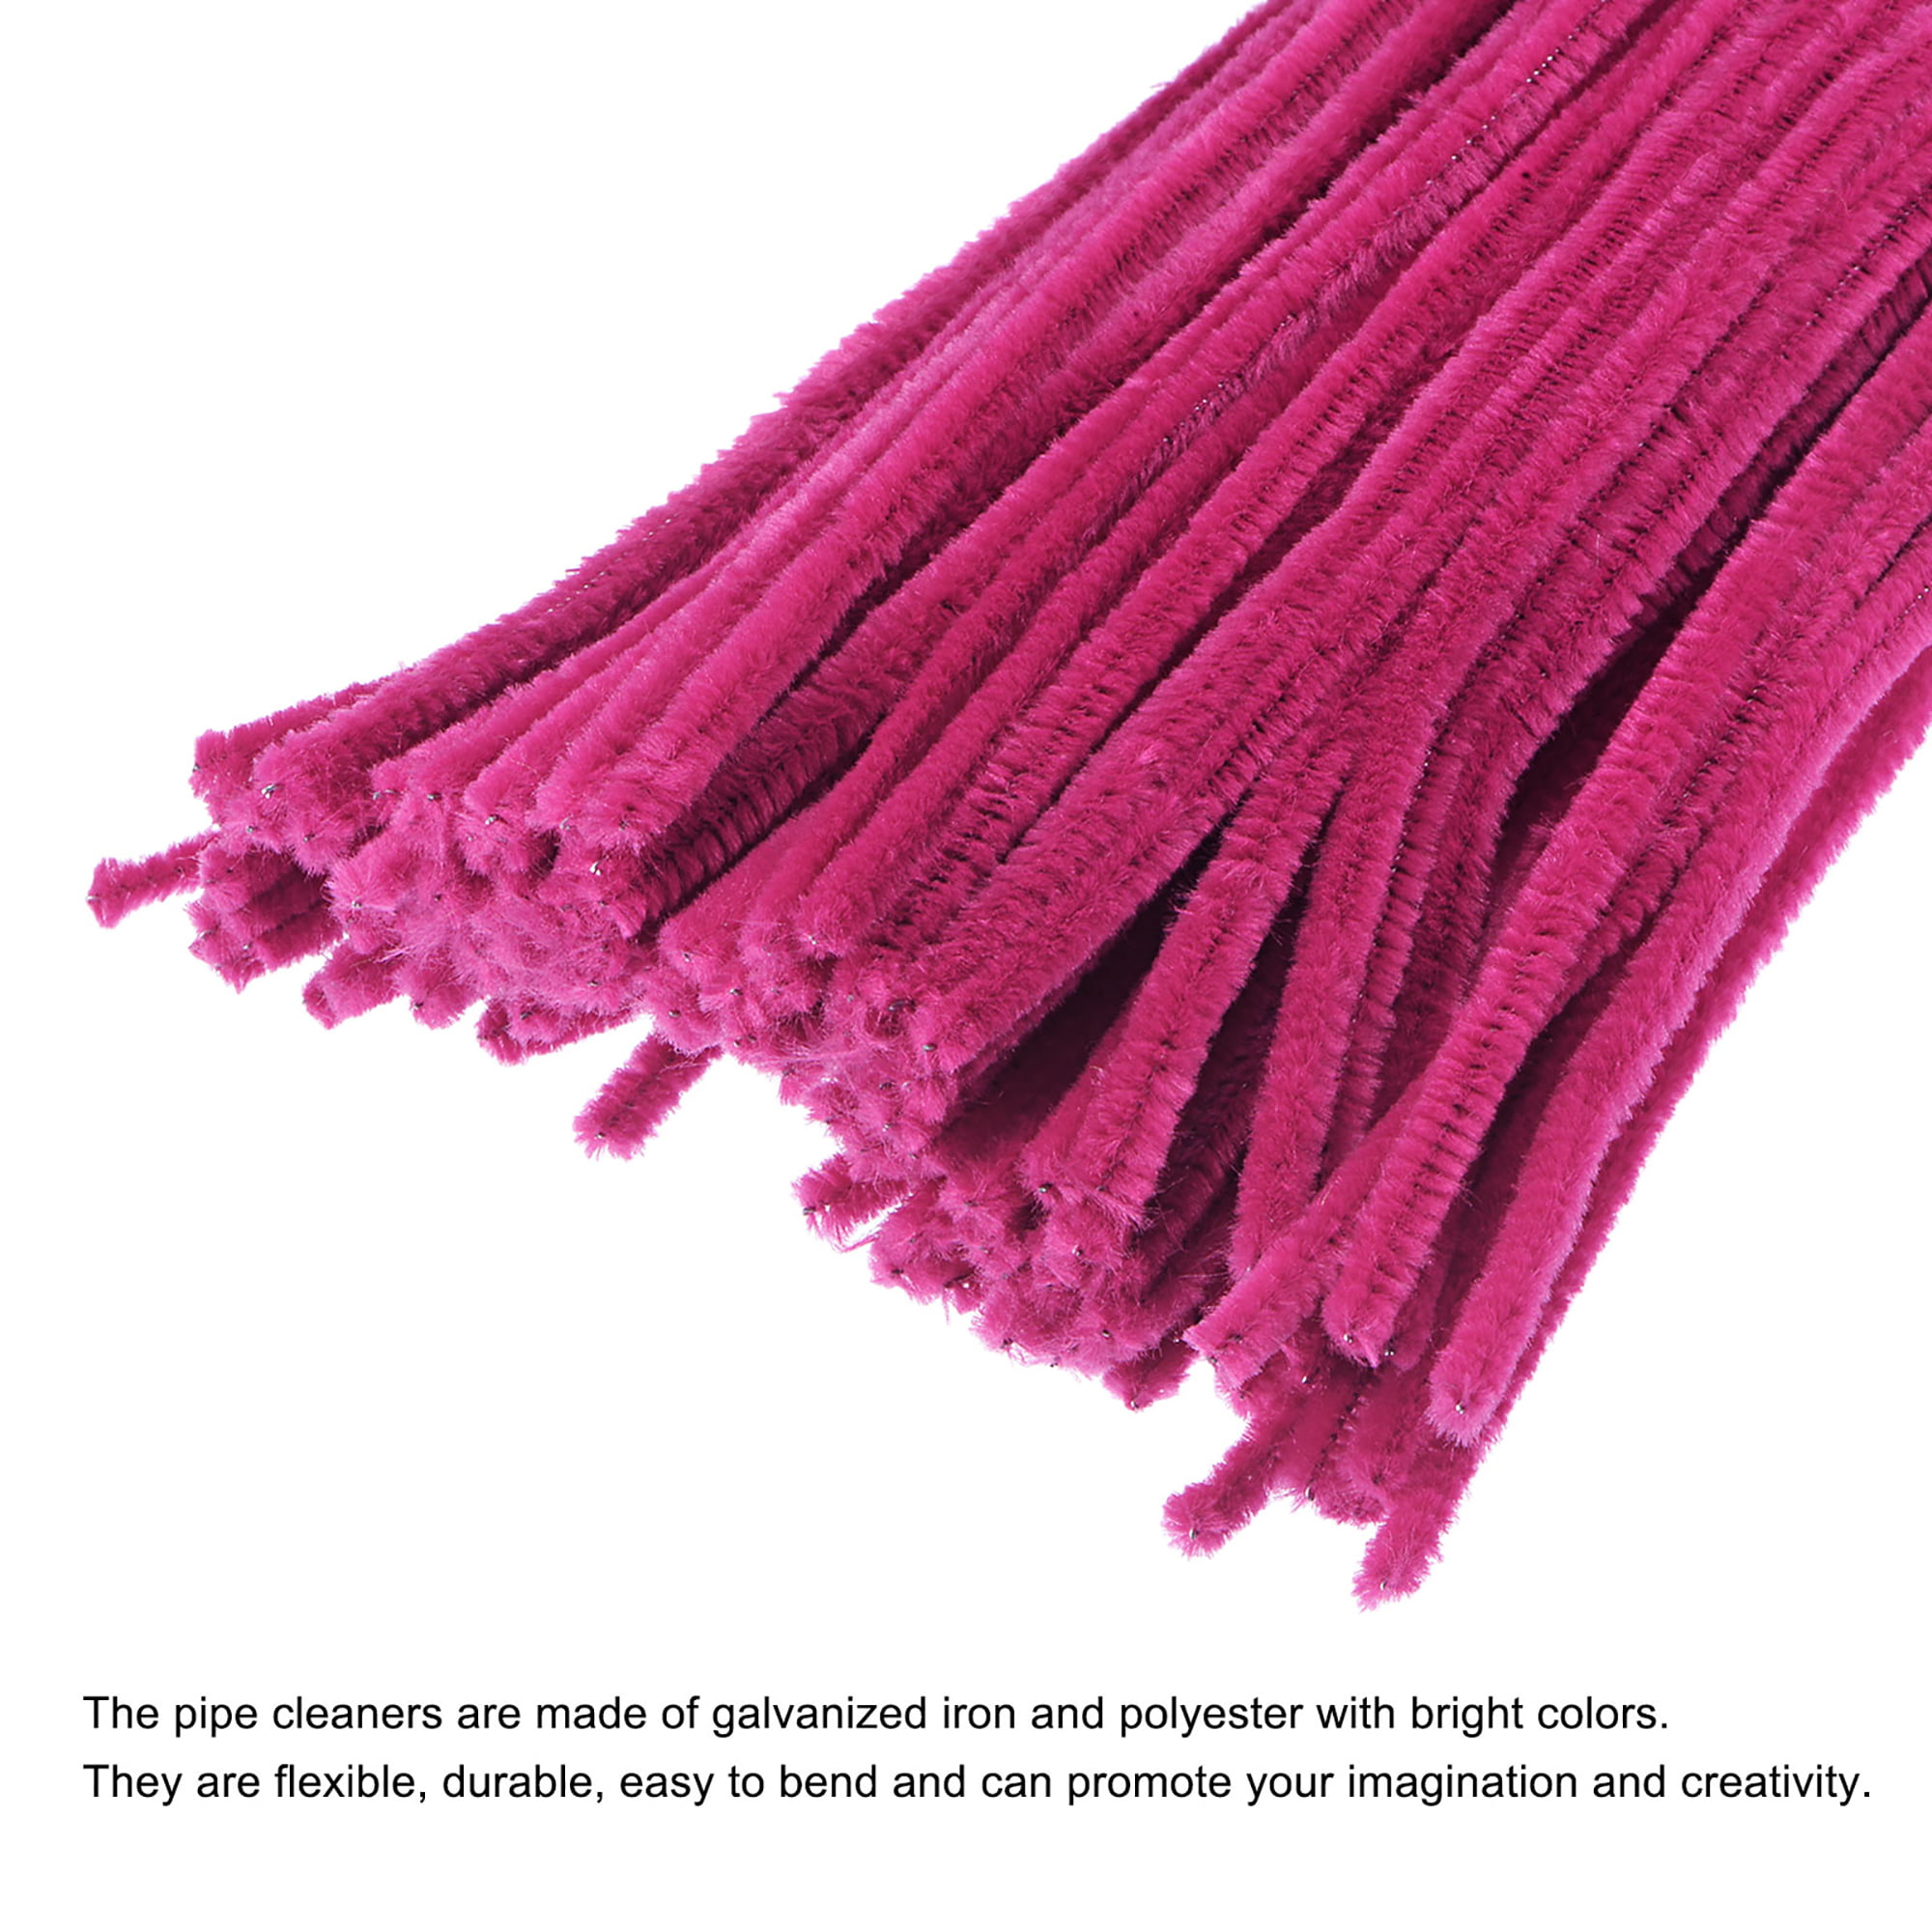 Caryko Super Fuzzy Chenille Stems Pipe Cleaners Pack of 100 (Hot Pink)